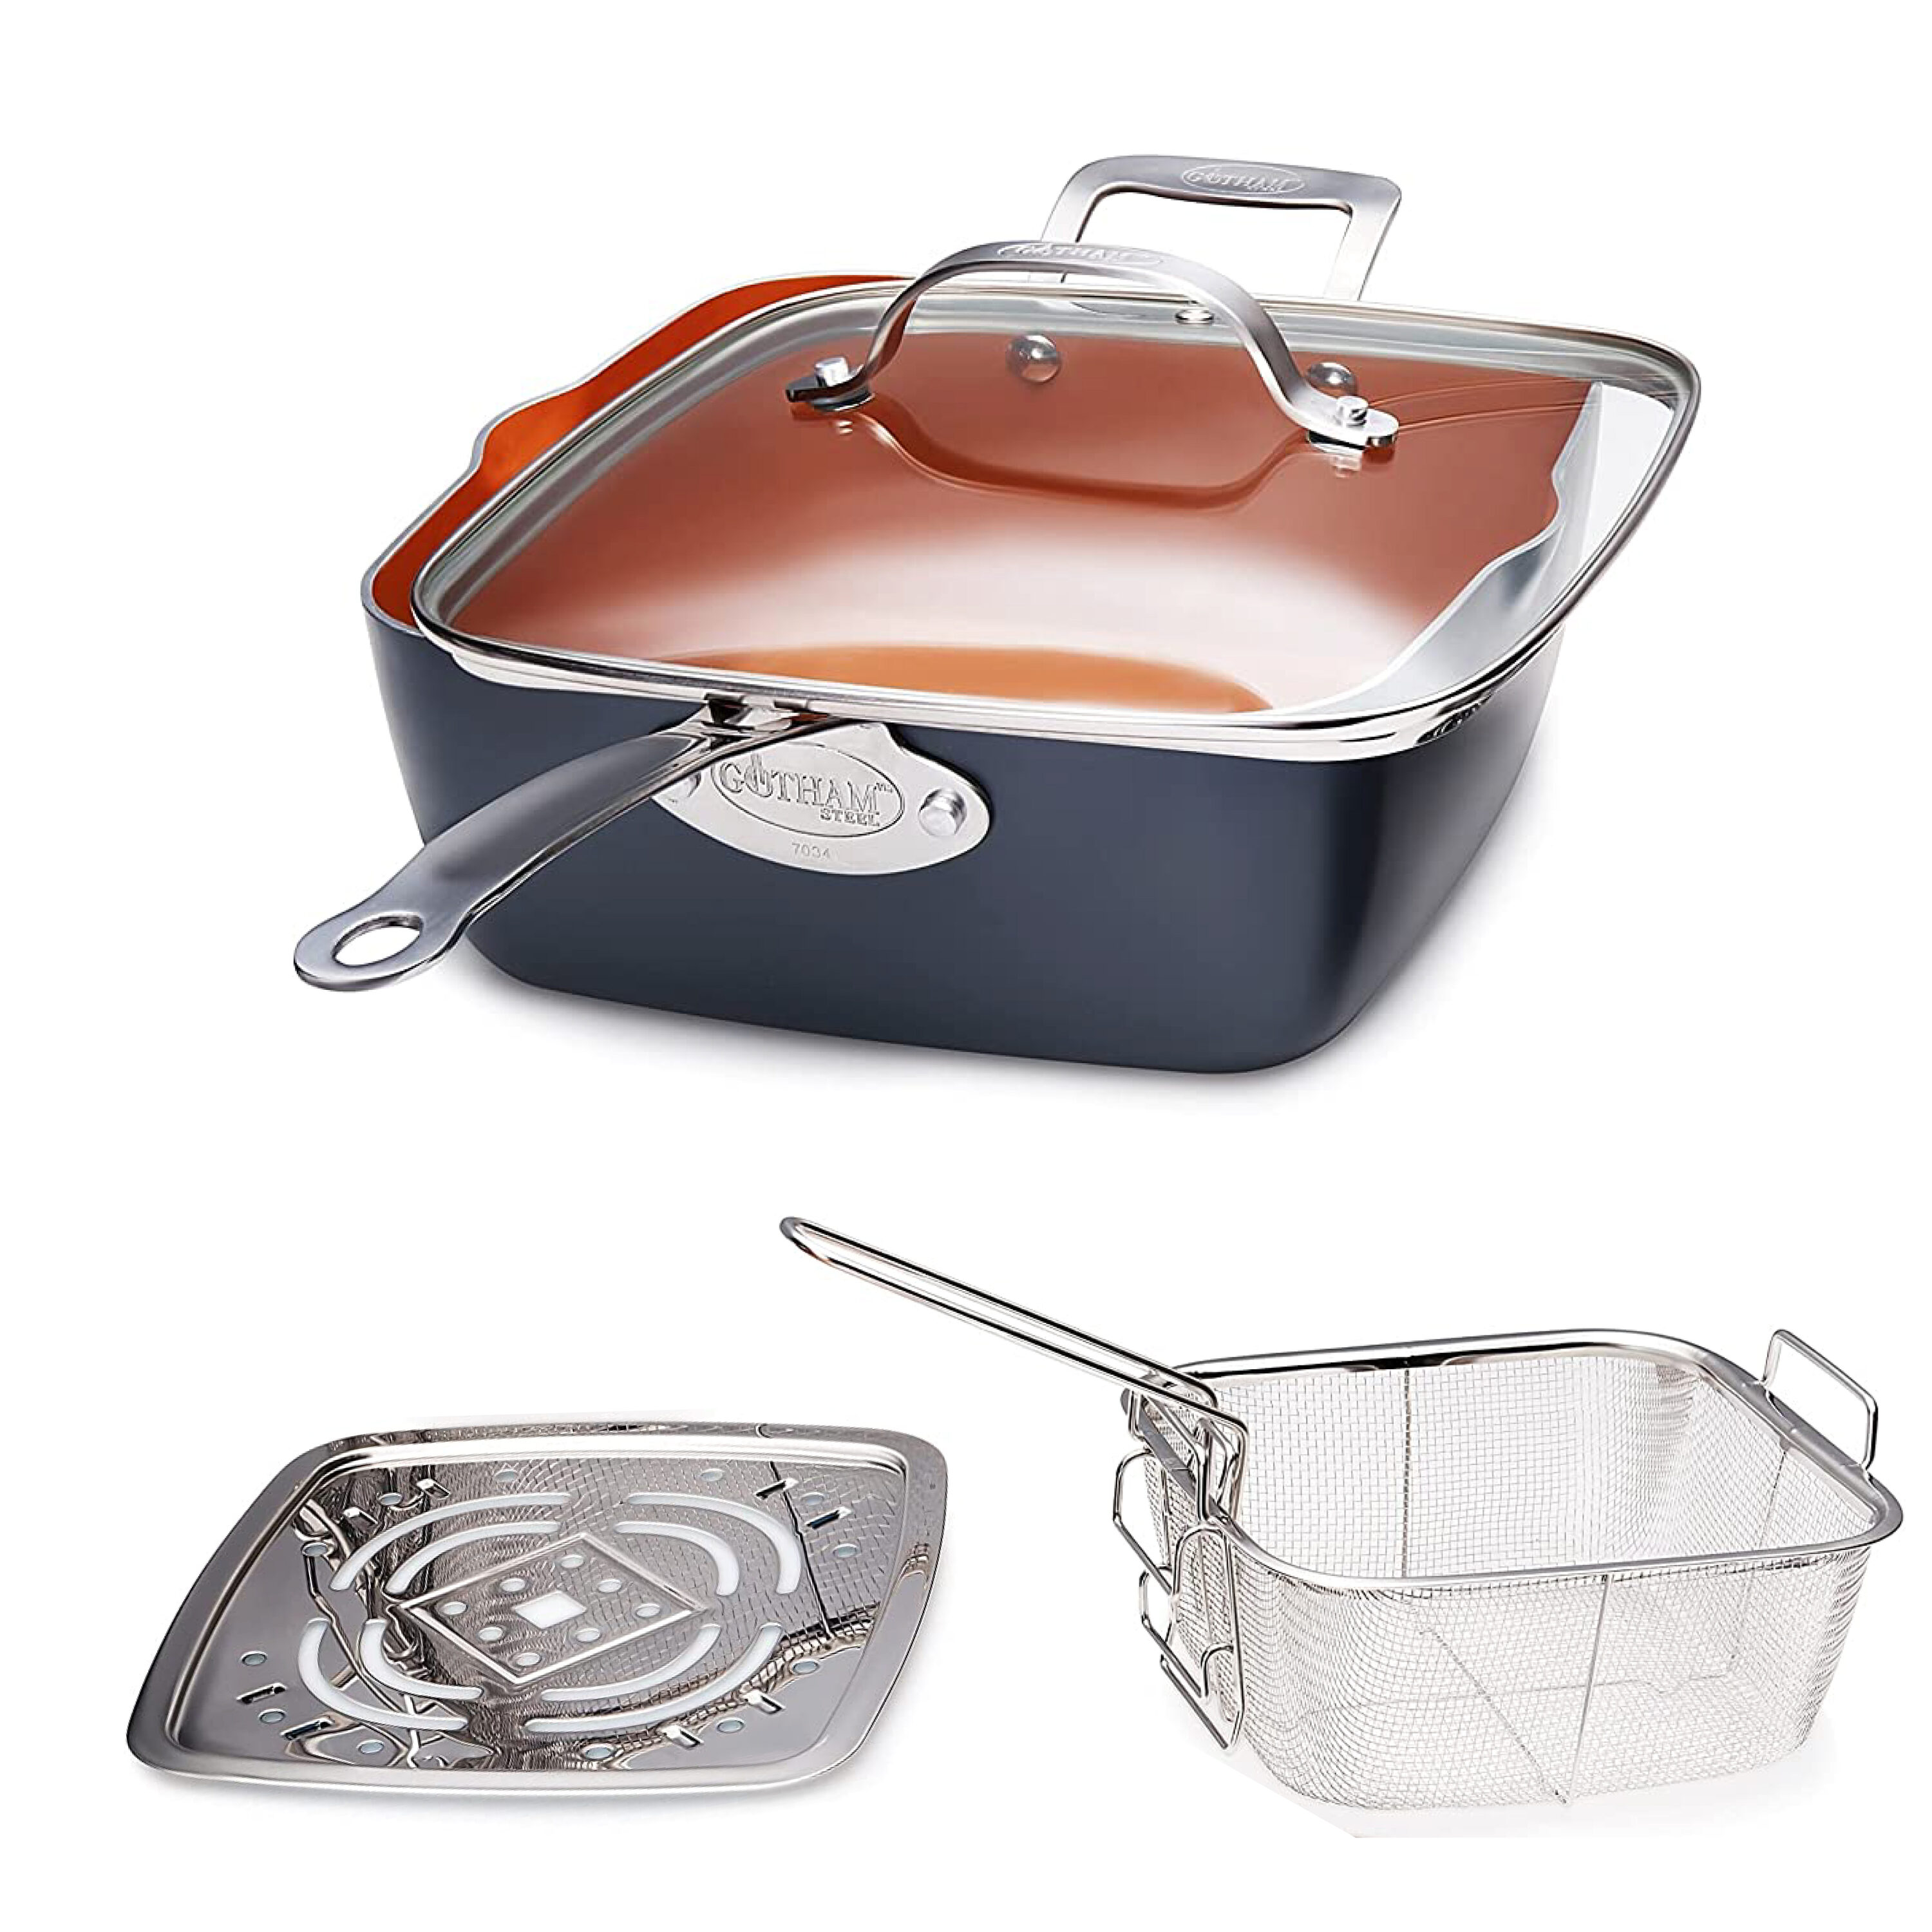 Gotham Steel - 6 Quart XL Nonstick Copper Deep Square All in One 6 Qt  Casserole Chef’s Pan & Stock Pot- 4 Piece Set, Includes Frying Basket and